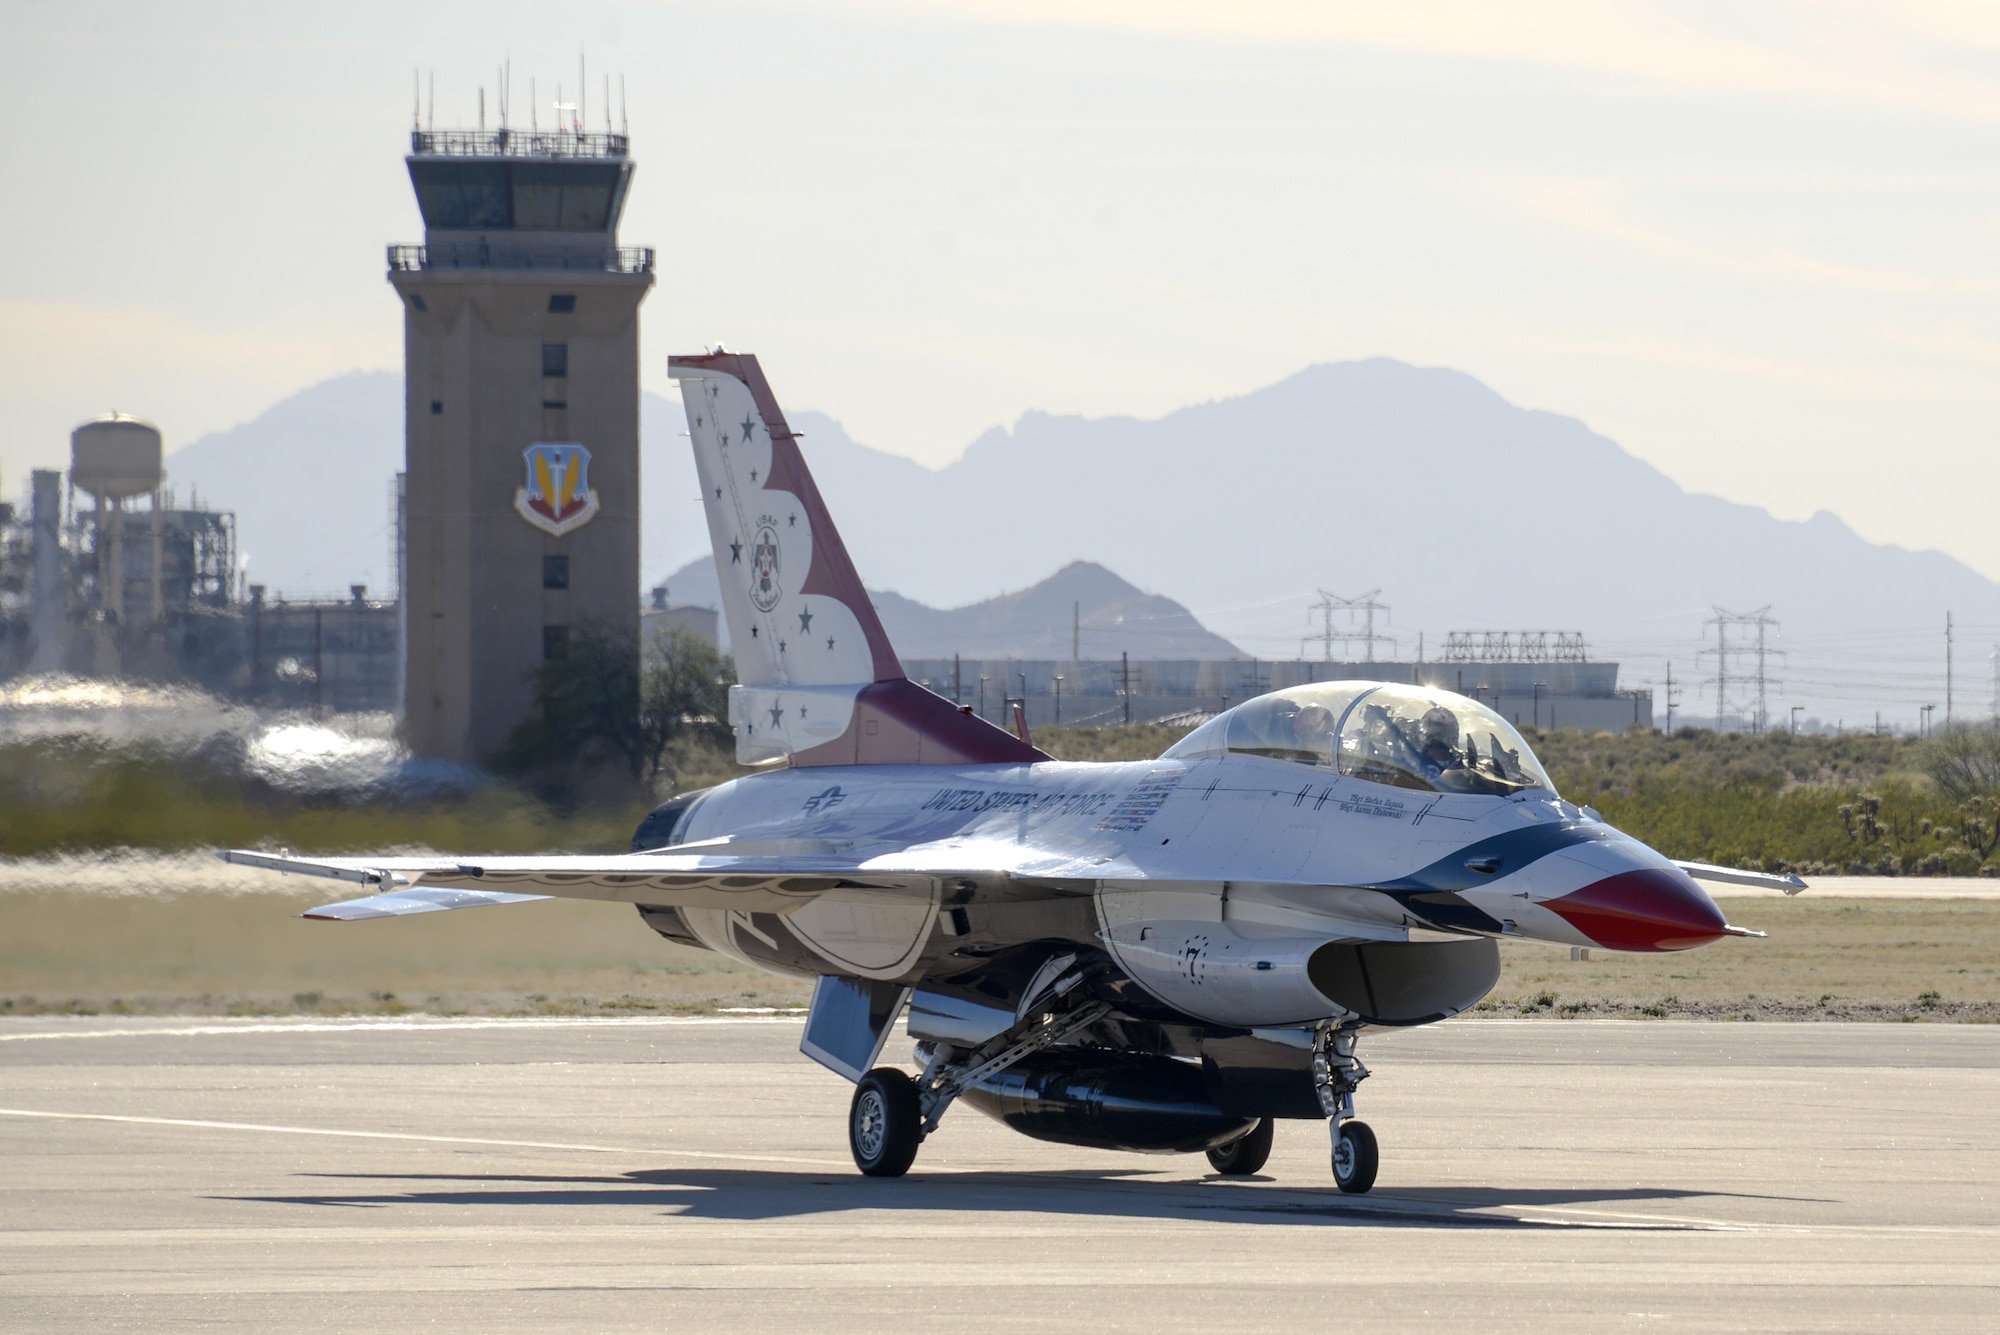 U.S. Air Force Maj. Kevin Walsh, U.S. Air Force Air Demonstration Squadron pilot and operations officer, taxis Thunderbird 7, an F-16 Fighting Falcon, with Brendon Lyons, Tucson community hometown hero, in the rear seat at Davis-Monthan Air Force Base, Ariz., March 11, 2016.  Lyons was nominated as a hometown hero because of his commitment to safety and his passion to make Tucson a safer community for cyclists and motorists.  (U.S. Air Force photo by Senior Airman Chris Massey/Released)